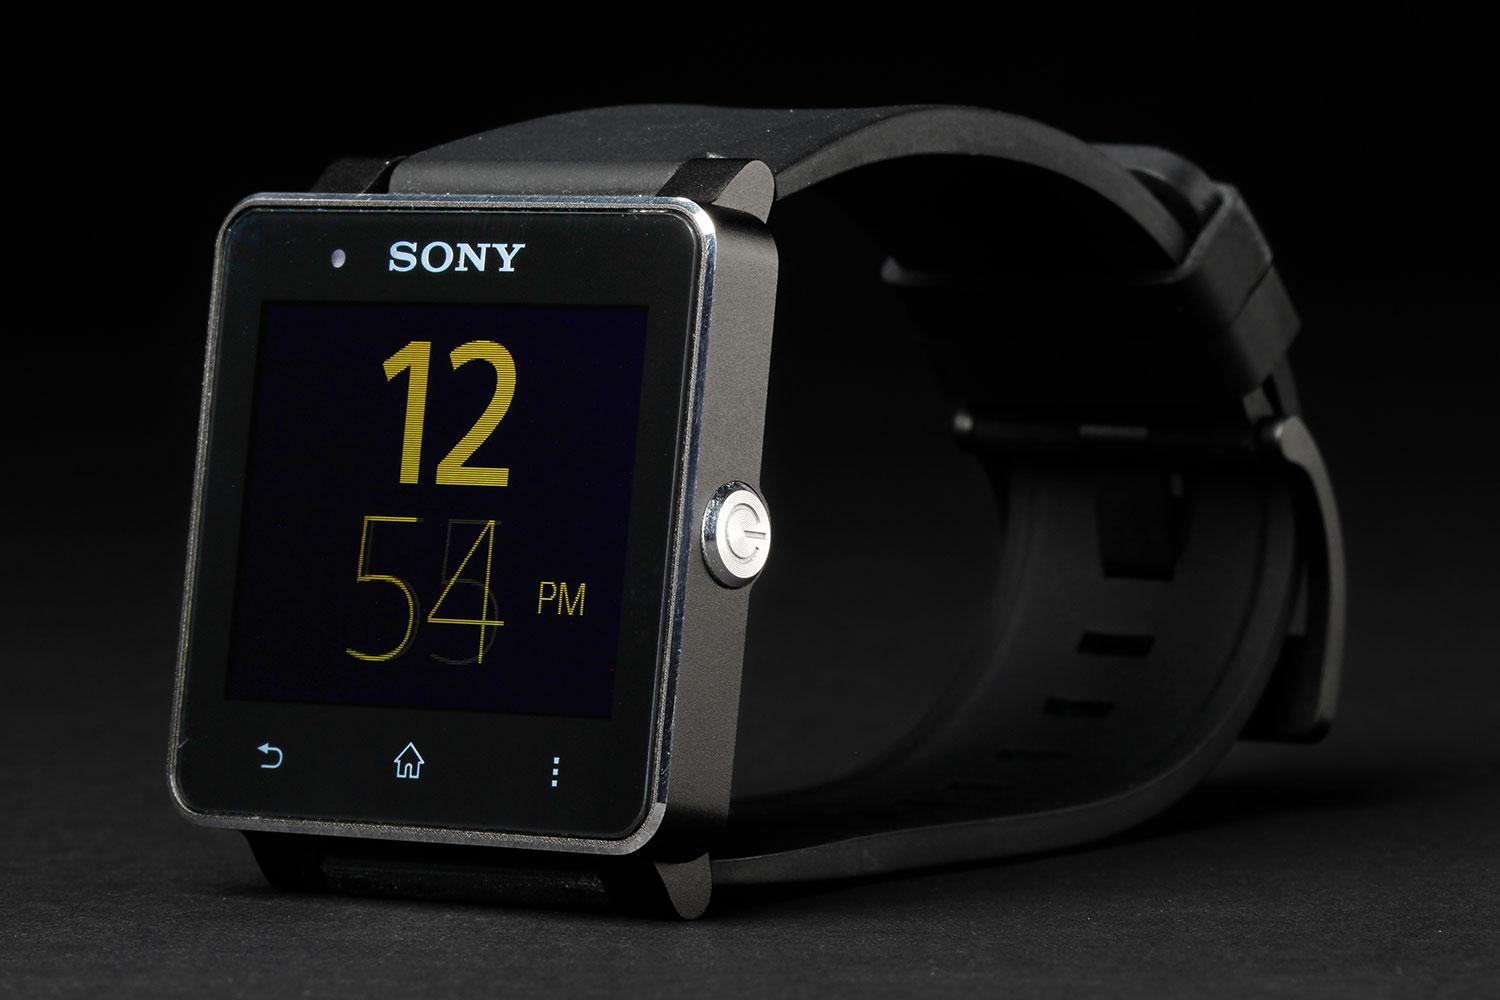 AP review: Sony smartwatch good but not essential